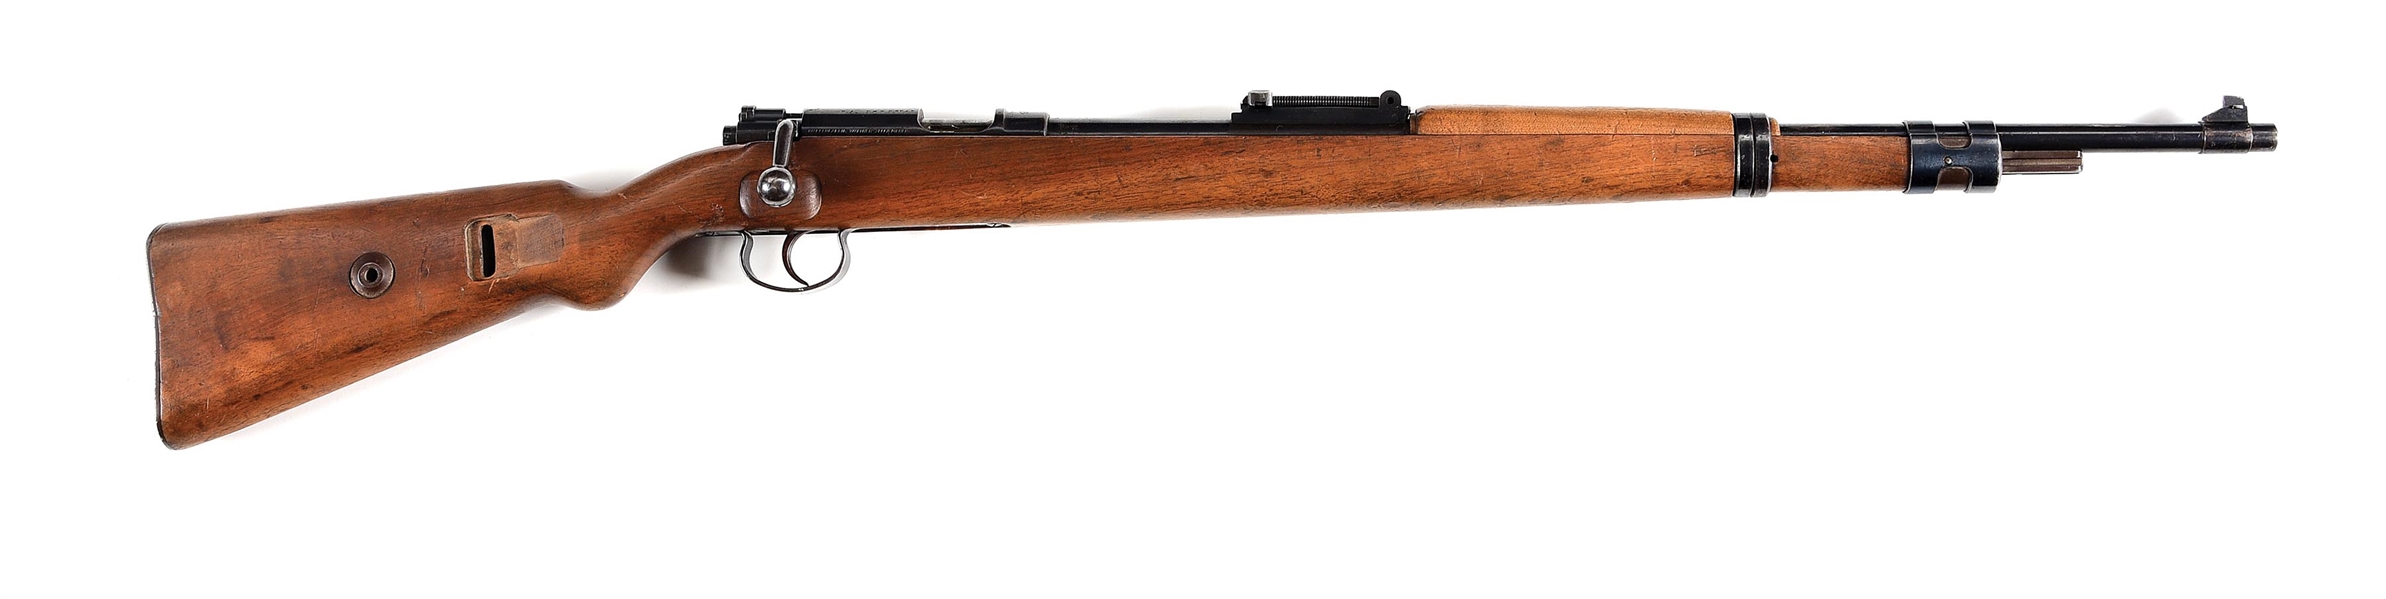 (C) "SA D. NSDAP" MARKED WALTHER KKW .22LR BOLT ACTION TRAINING RIFLE.